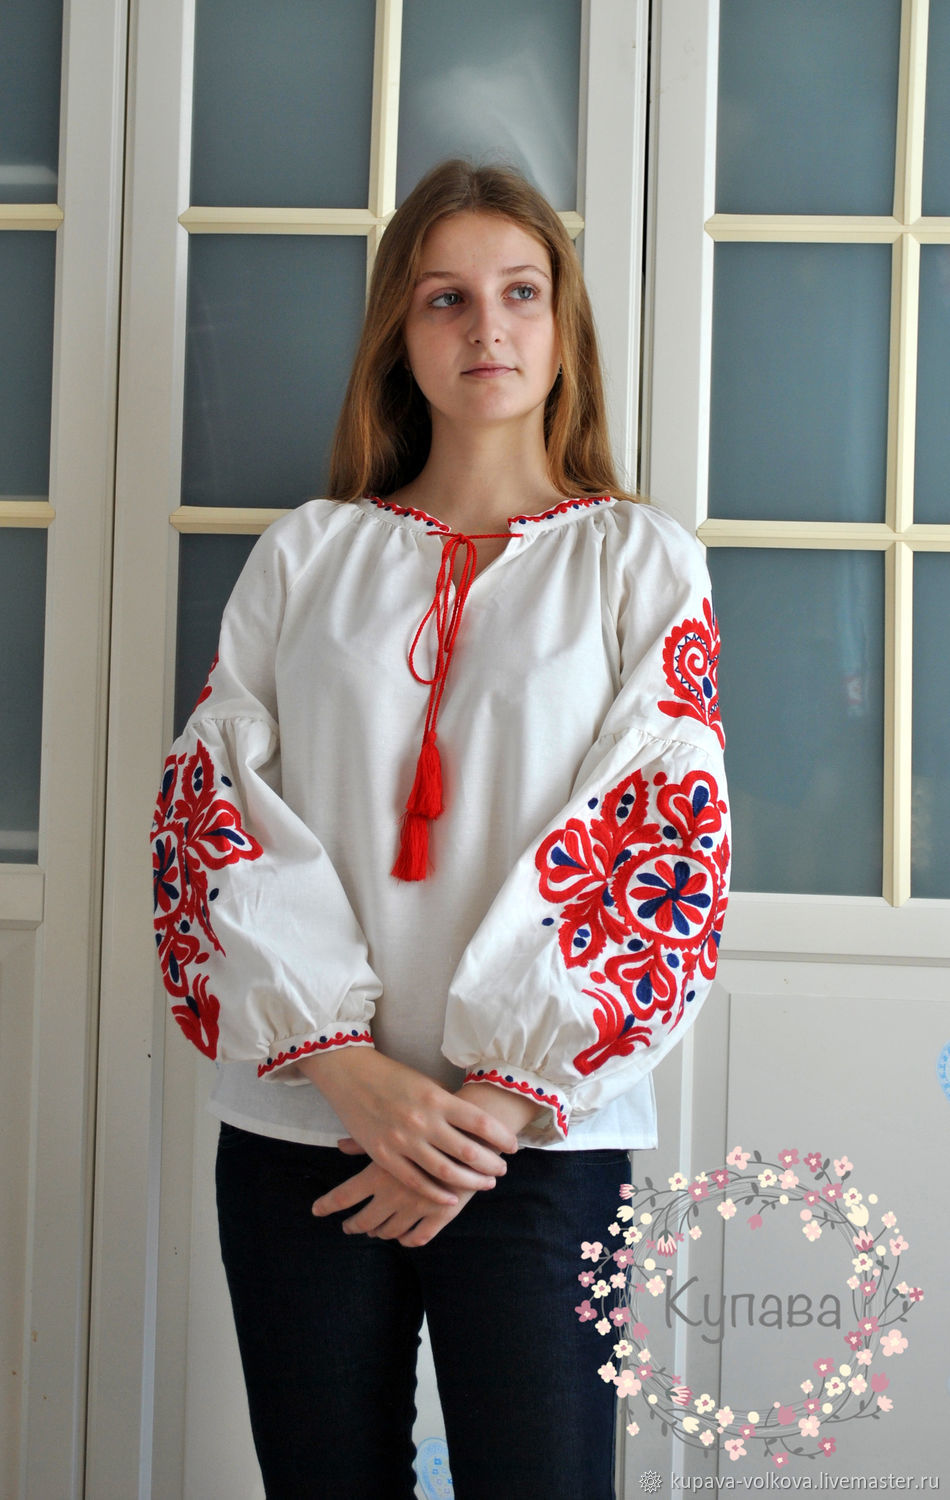 Embroidered shirt in ethno / boho style white, People\\\'s shirts, Anapa,  Фото №1